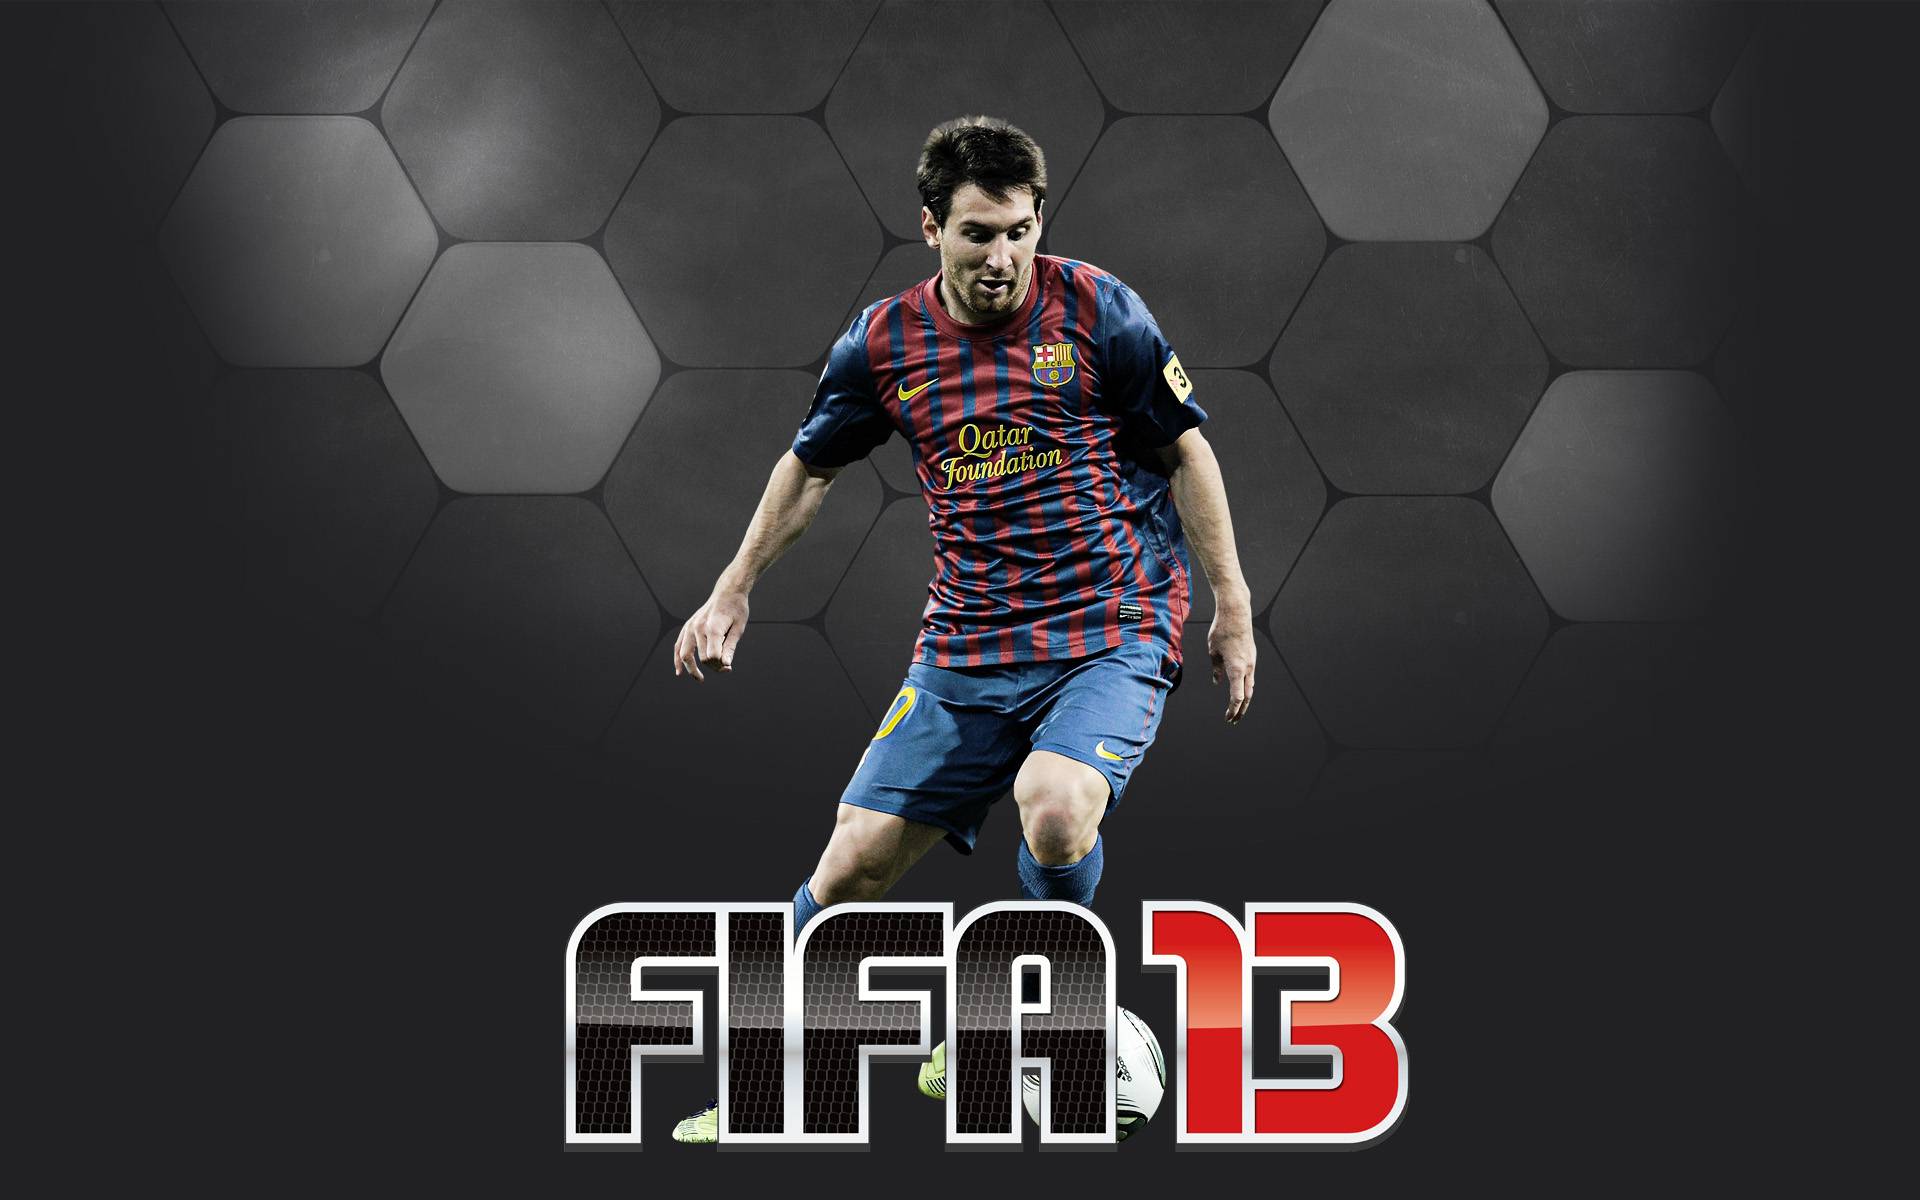 Gallery for - fifa wallpapers